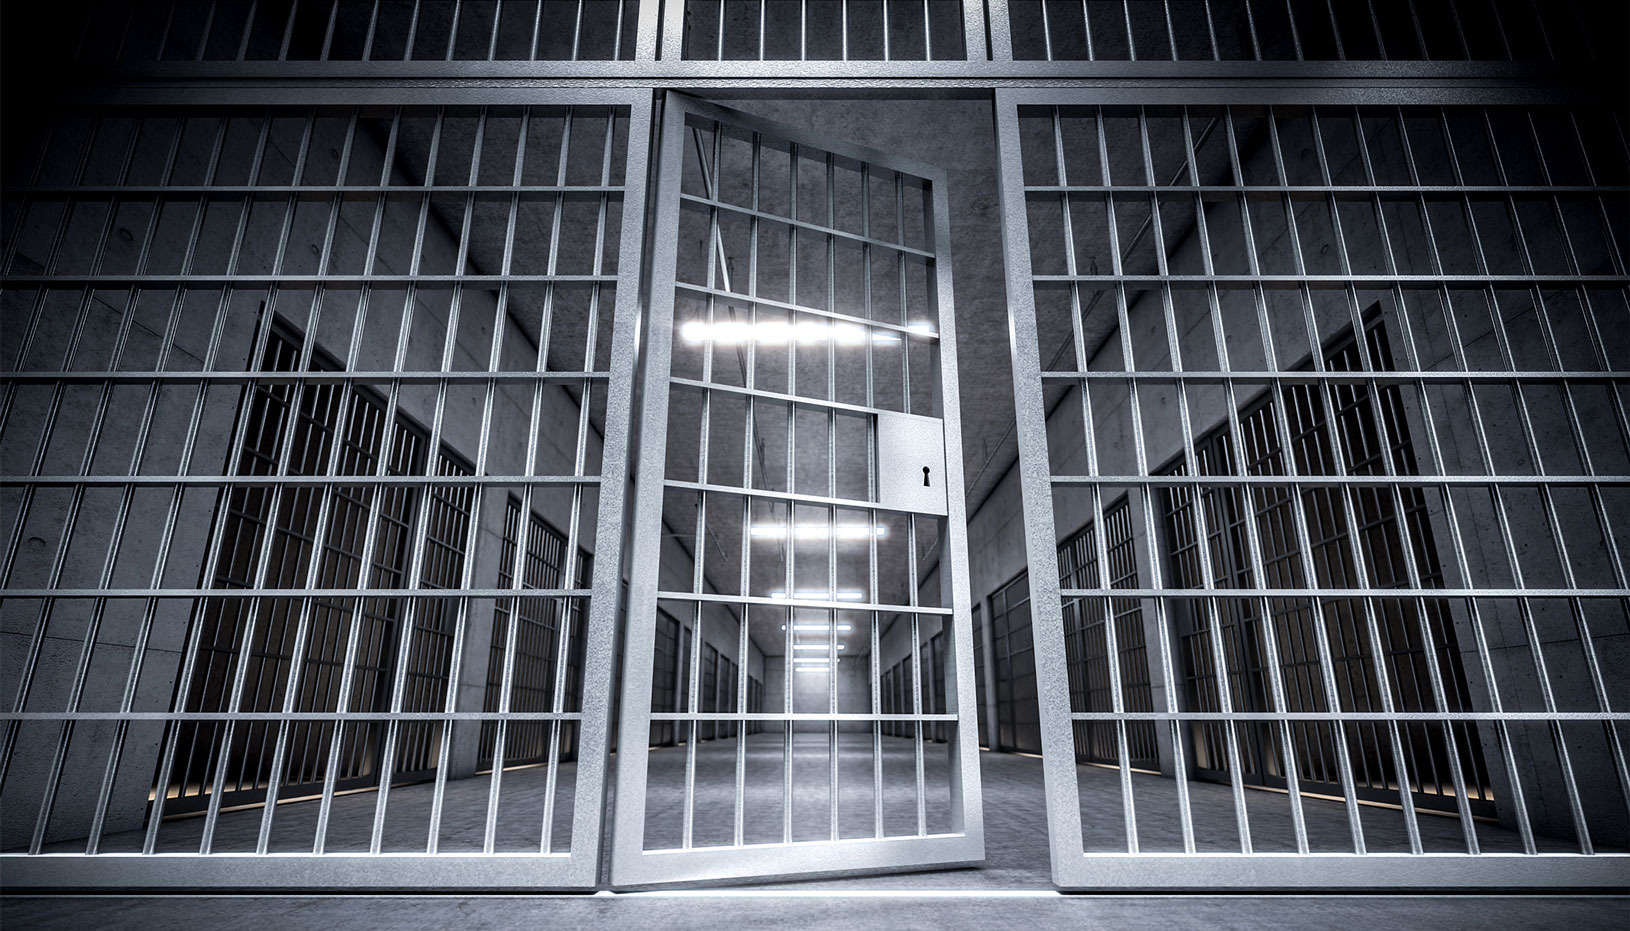 Black and White image of door to jail cells